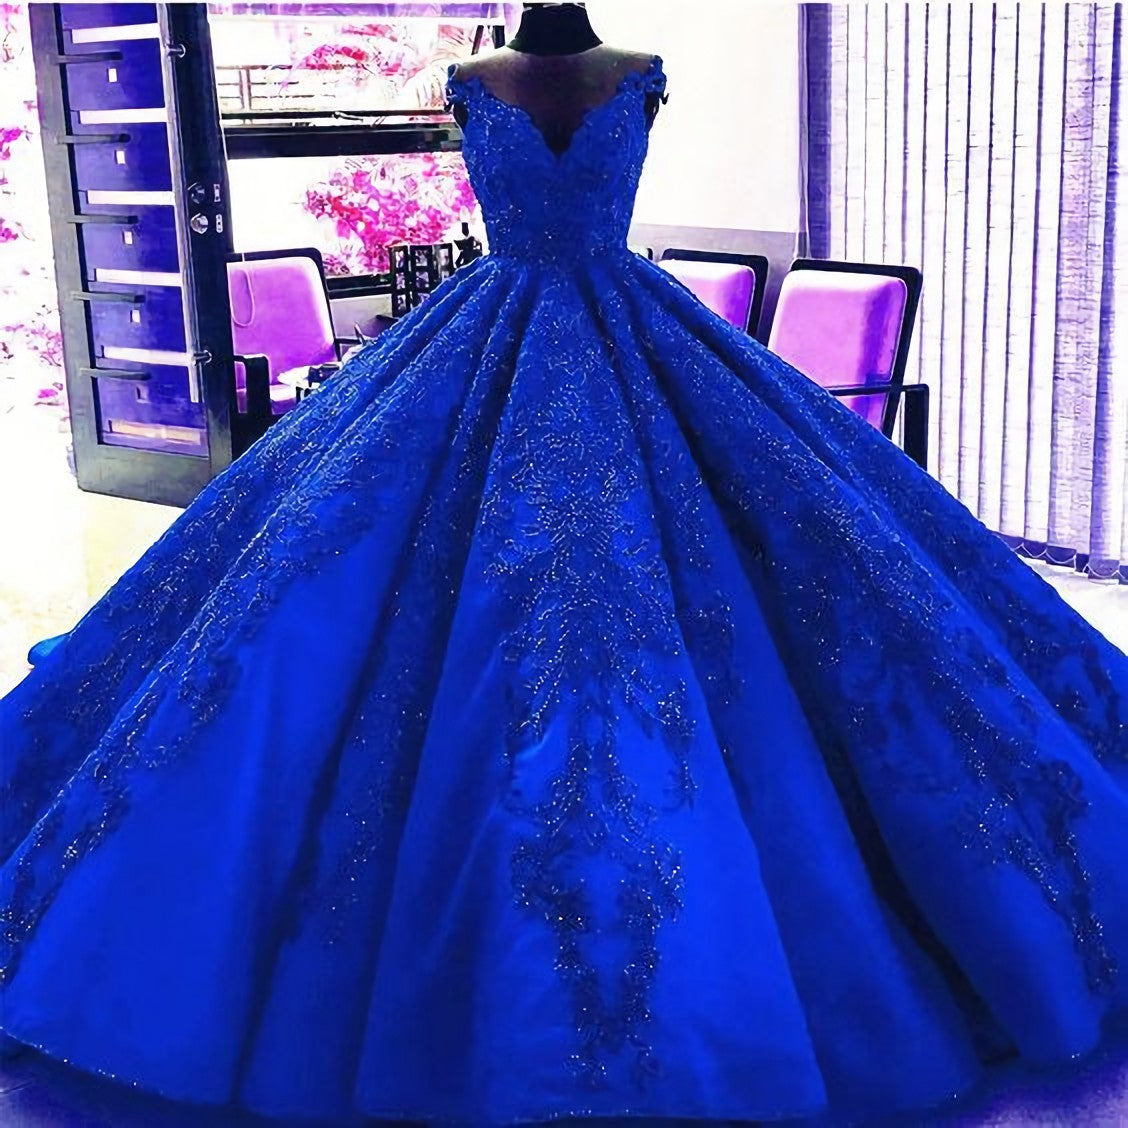 Gorgeous Royal Blue Appliques Beads Quinceanera Dresses, Formal Ball Gown Prom Dress